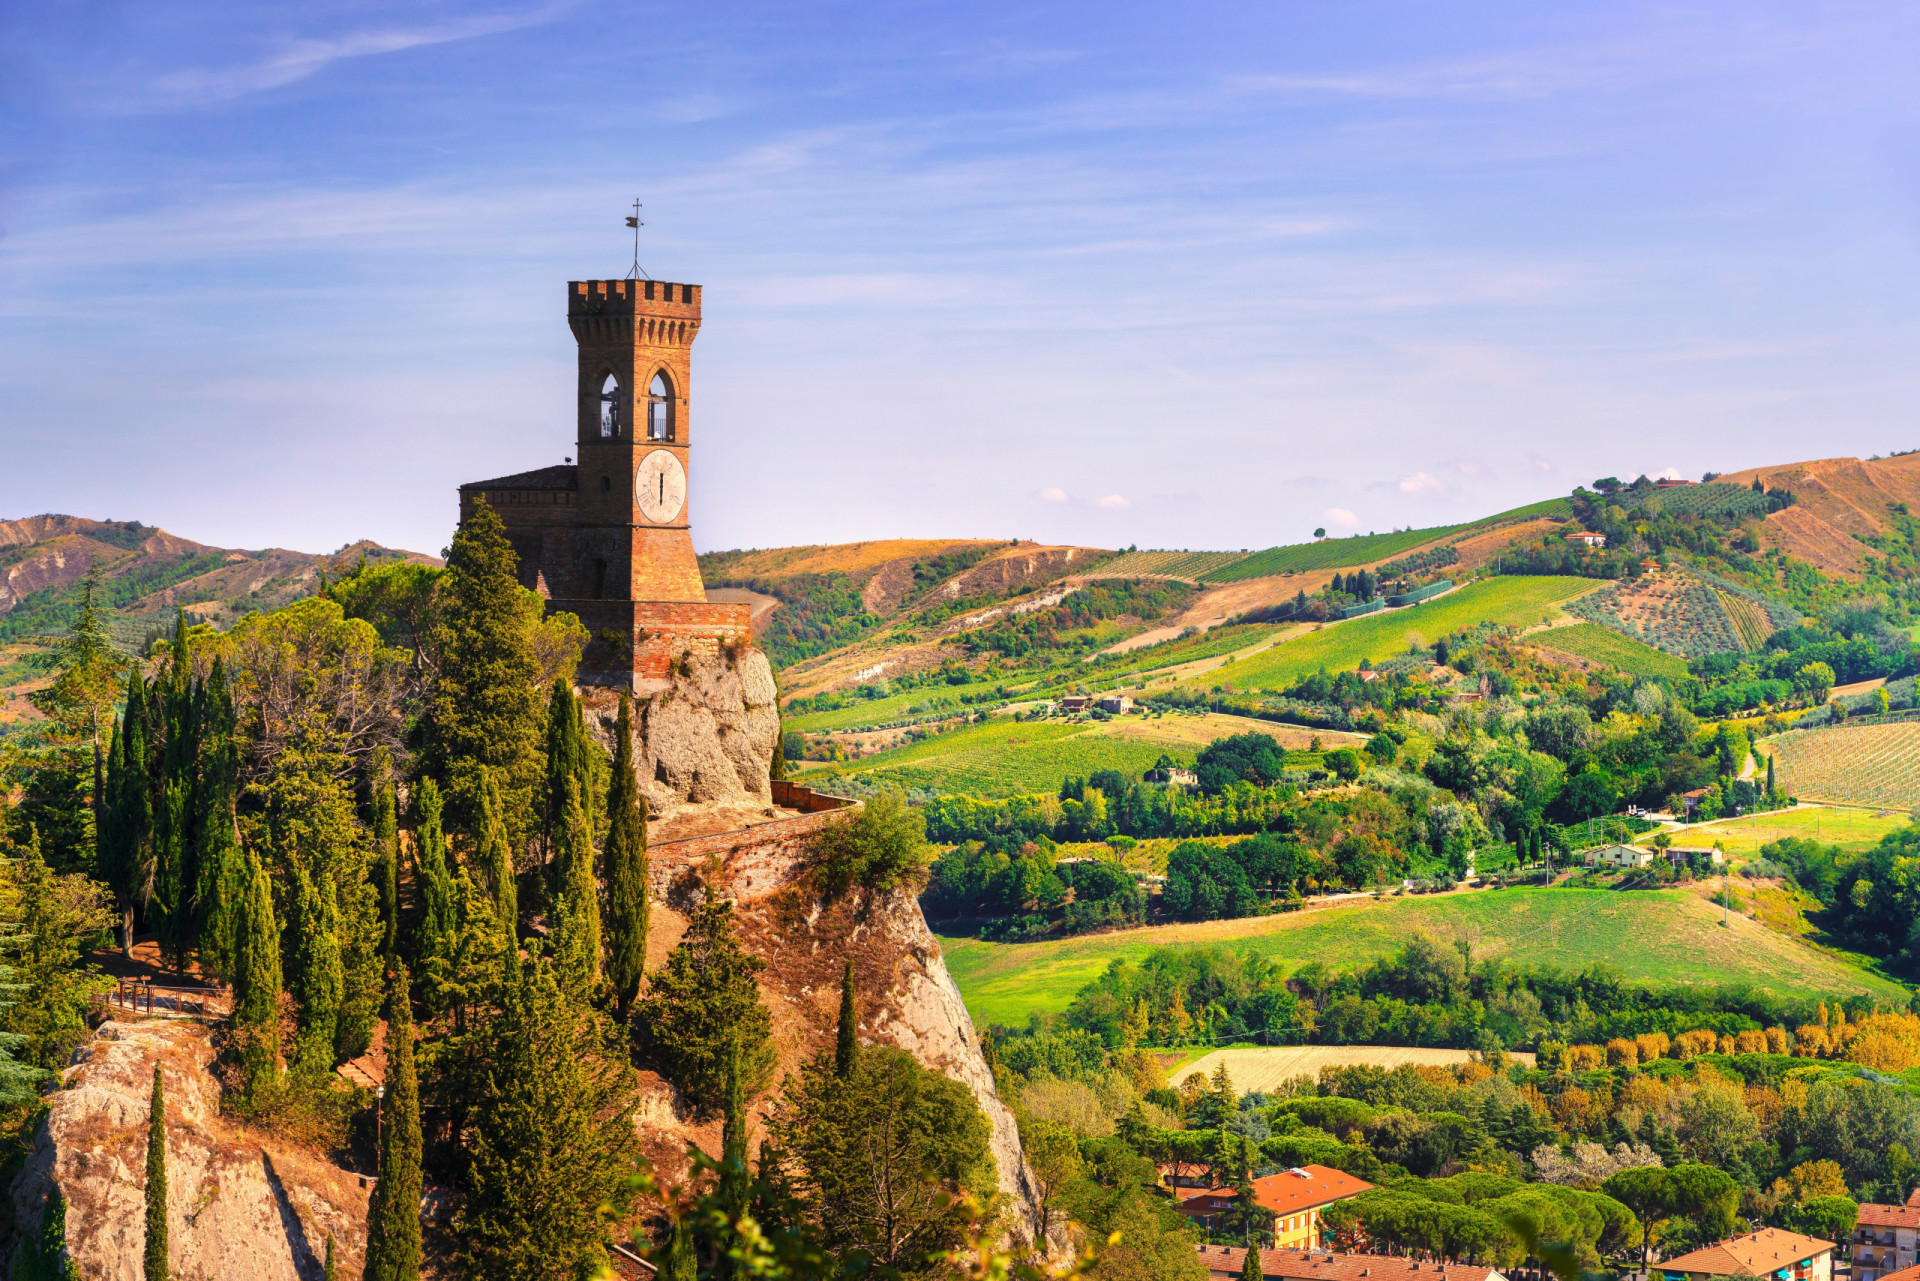 <p>This is considered one of Italy’s greatest cycling destinations. The clandestine villages and rolling hills of Emilia-Romagna are set as the first stage of the Tour de France in June. Not to mention that it is also known as a culinary haven.</p><p><a href="https://www.msn.com/en-us/community/channel/vid-7xx8mnucu55yw63we9va2gwr7uihbxwc68fxqp25x6tg4ftibpra?cvid=94631541bc0f4f89bfd59158d696ad7e">Follow us and access great exclusive content every day</a></p>